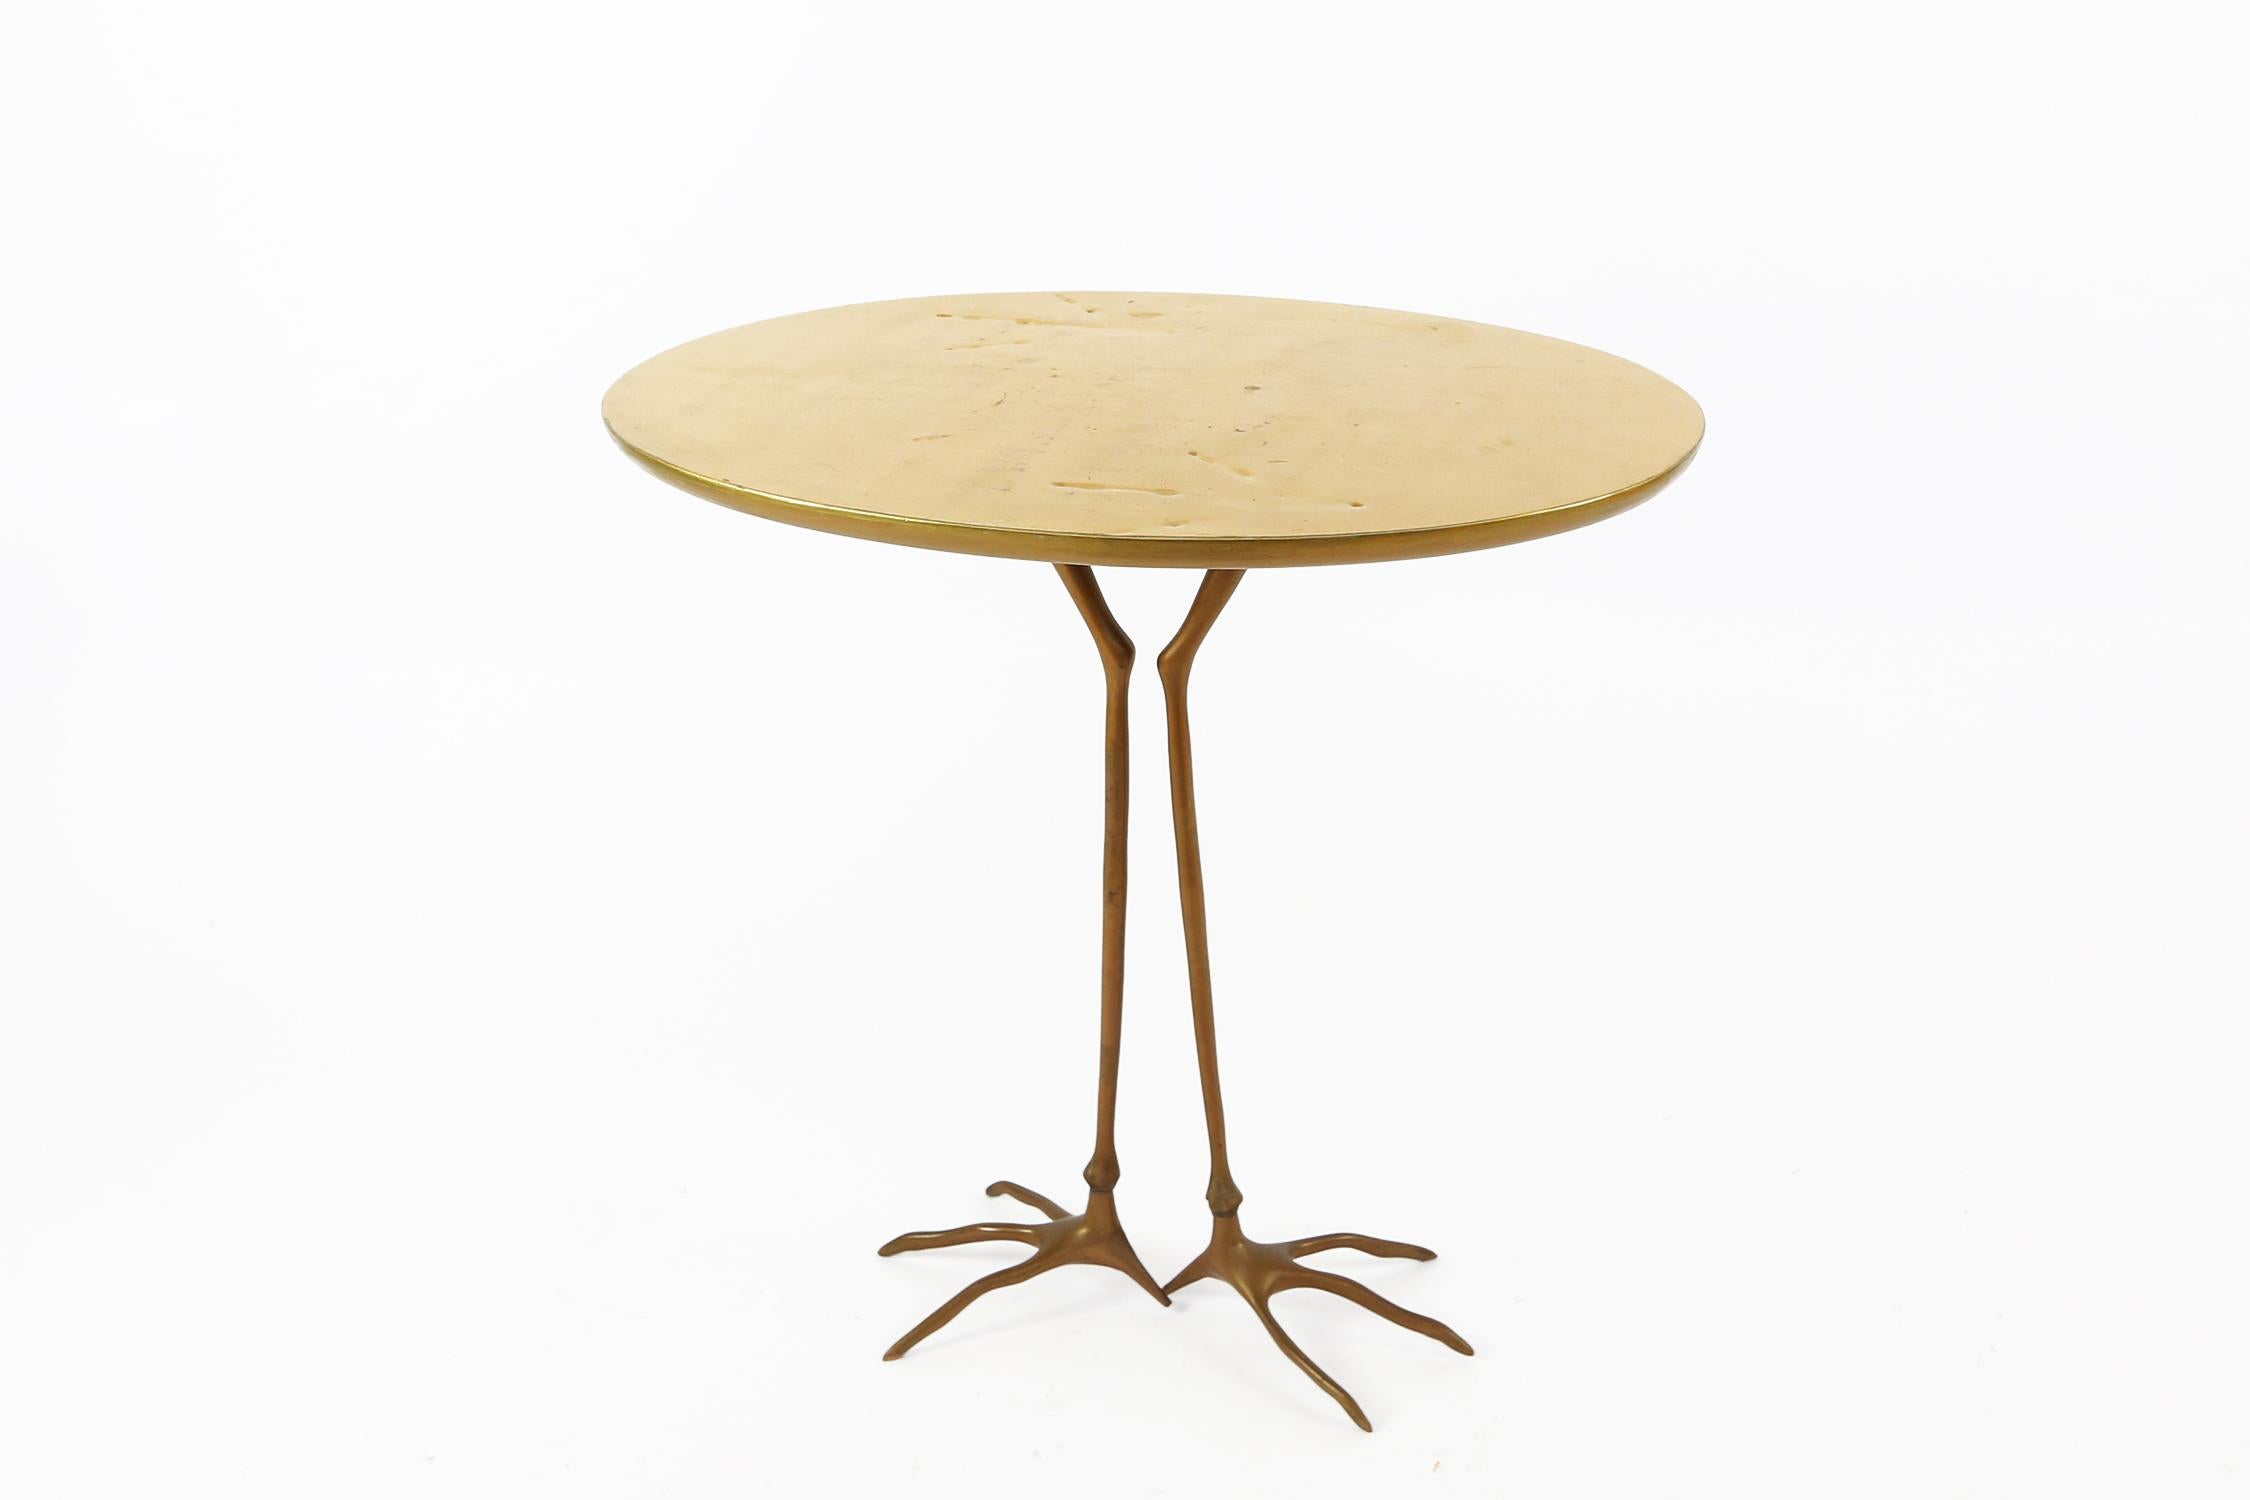 This early side table by surrealist artist Méret Oppenheim is part of the 1972 serial production of the original design she made in 1939. Both the golden color and shape of this table are very distinctive. The table is can be seen as the abstract